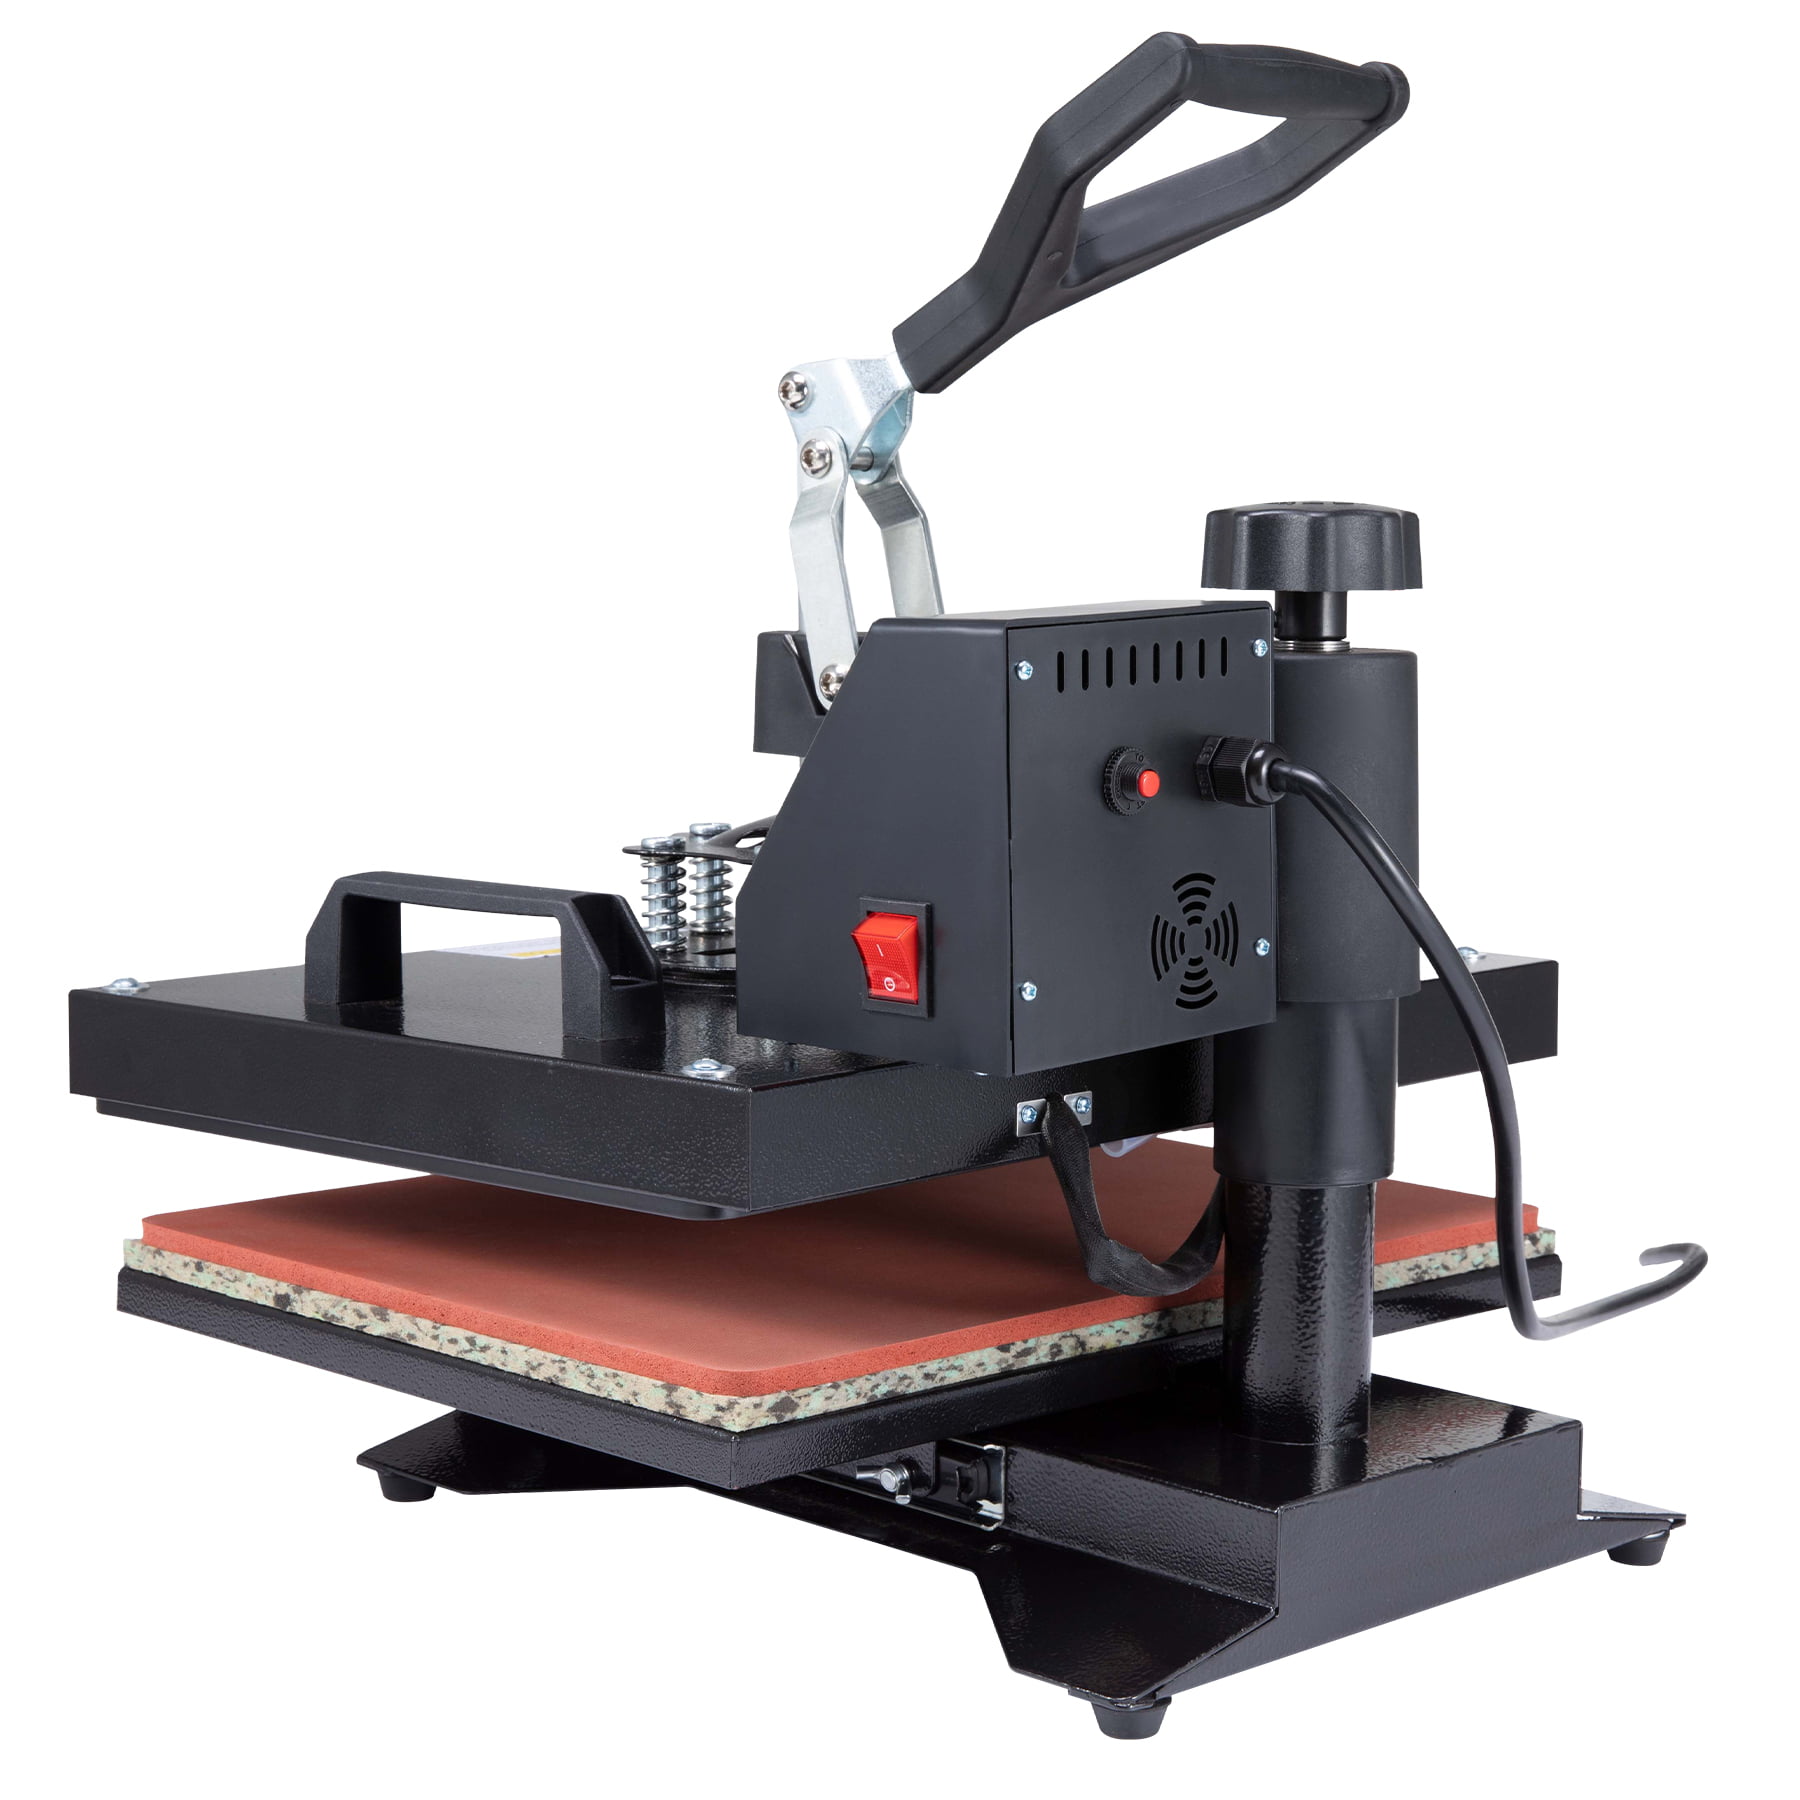 Heat Press Machines for sale in New Orleans, Louisiana